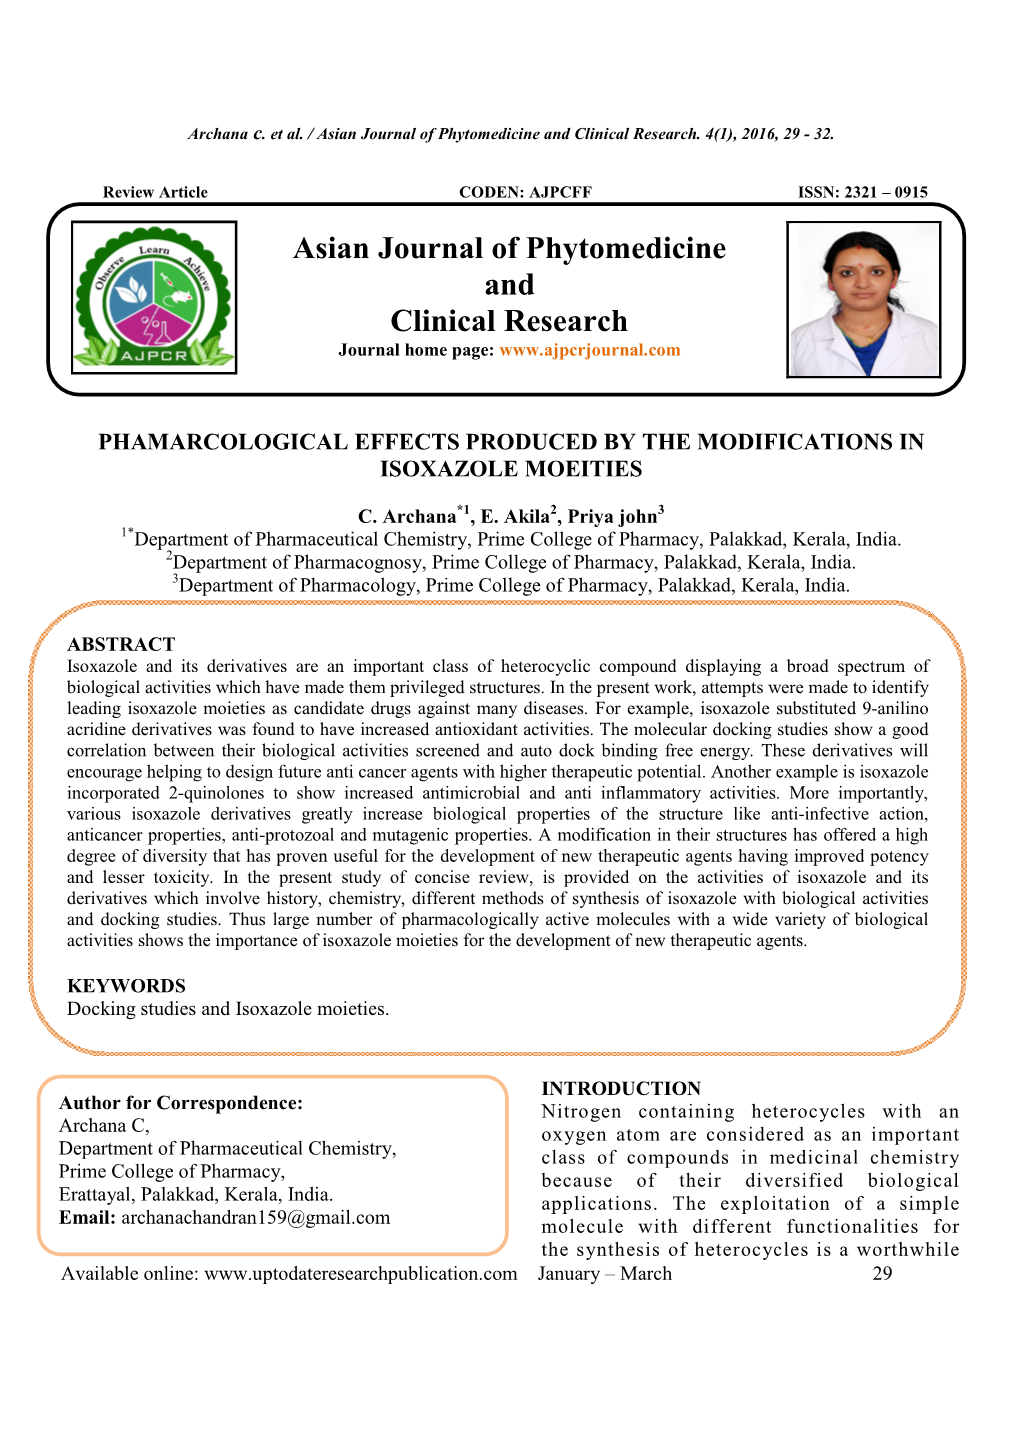 Phamarcological Effects Produced by the Modifications in Isoxazole Moeities